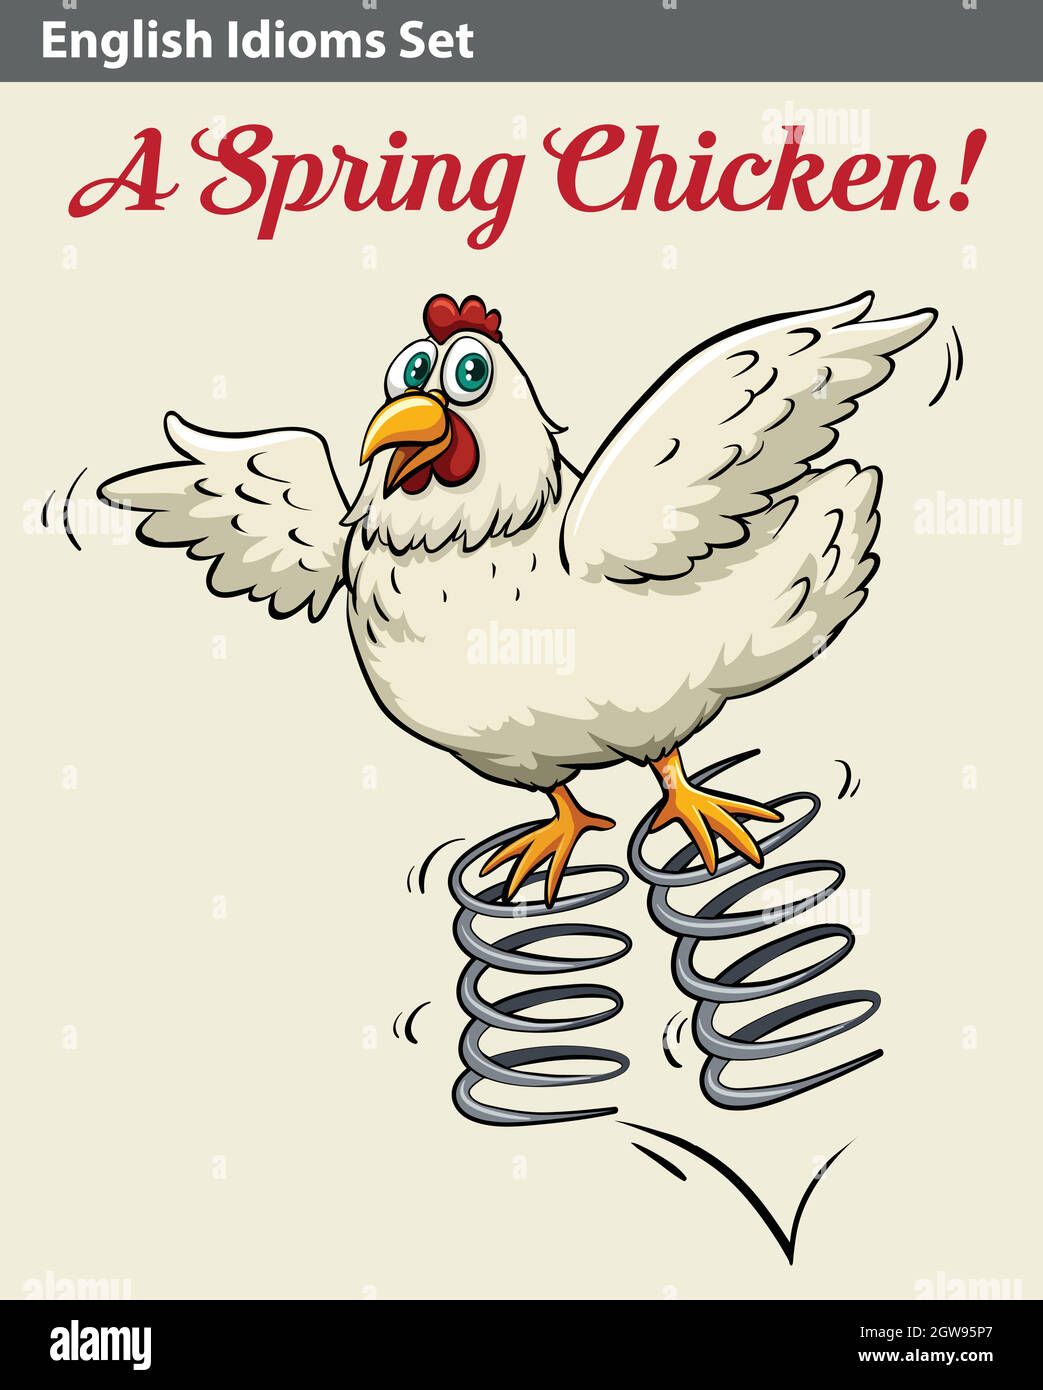 English idiom showing a spring chicken Stock Vector